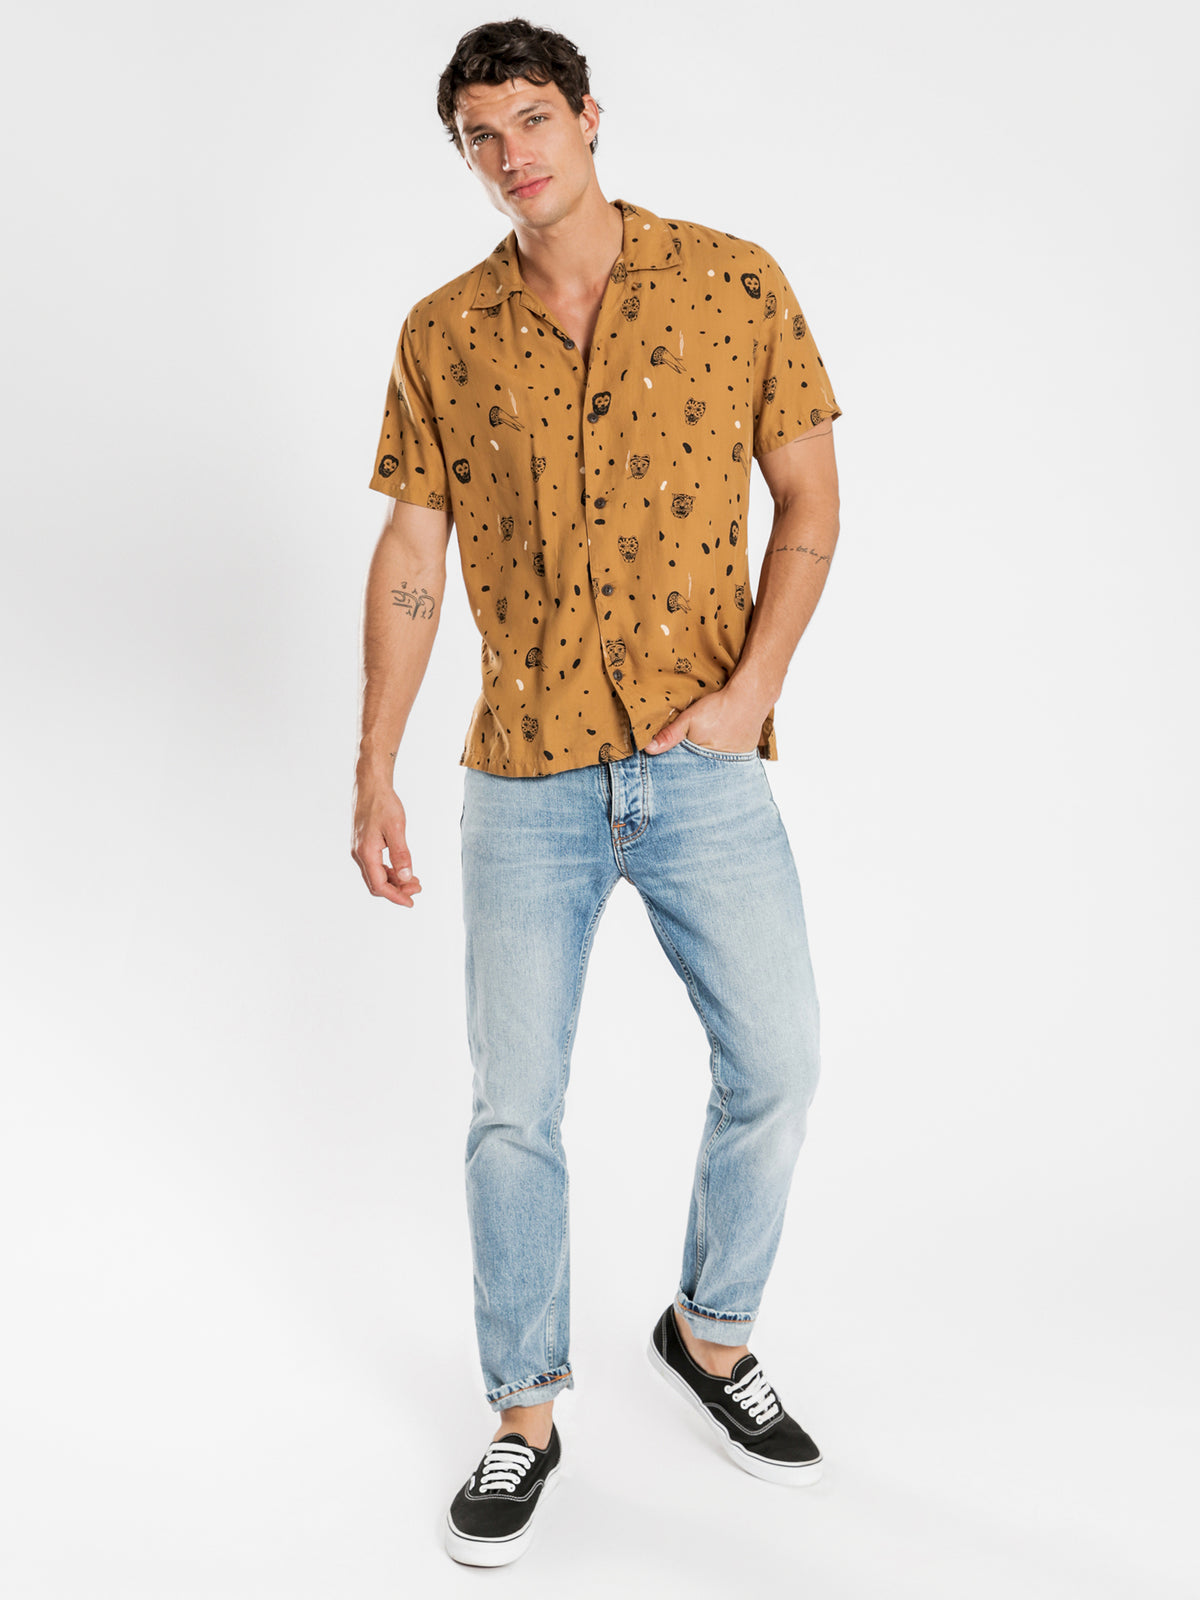 Arvid Misfit Creatures Shirt in Camel